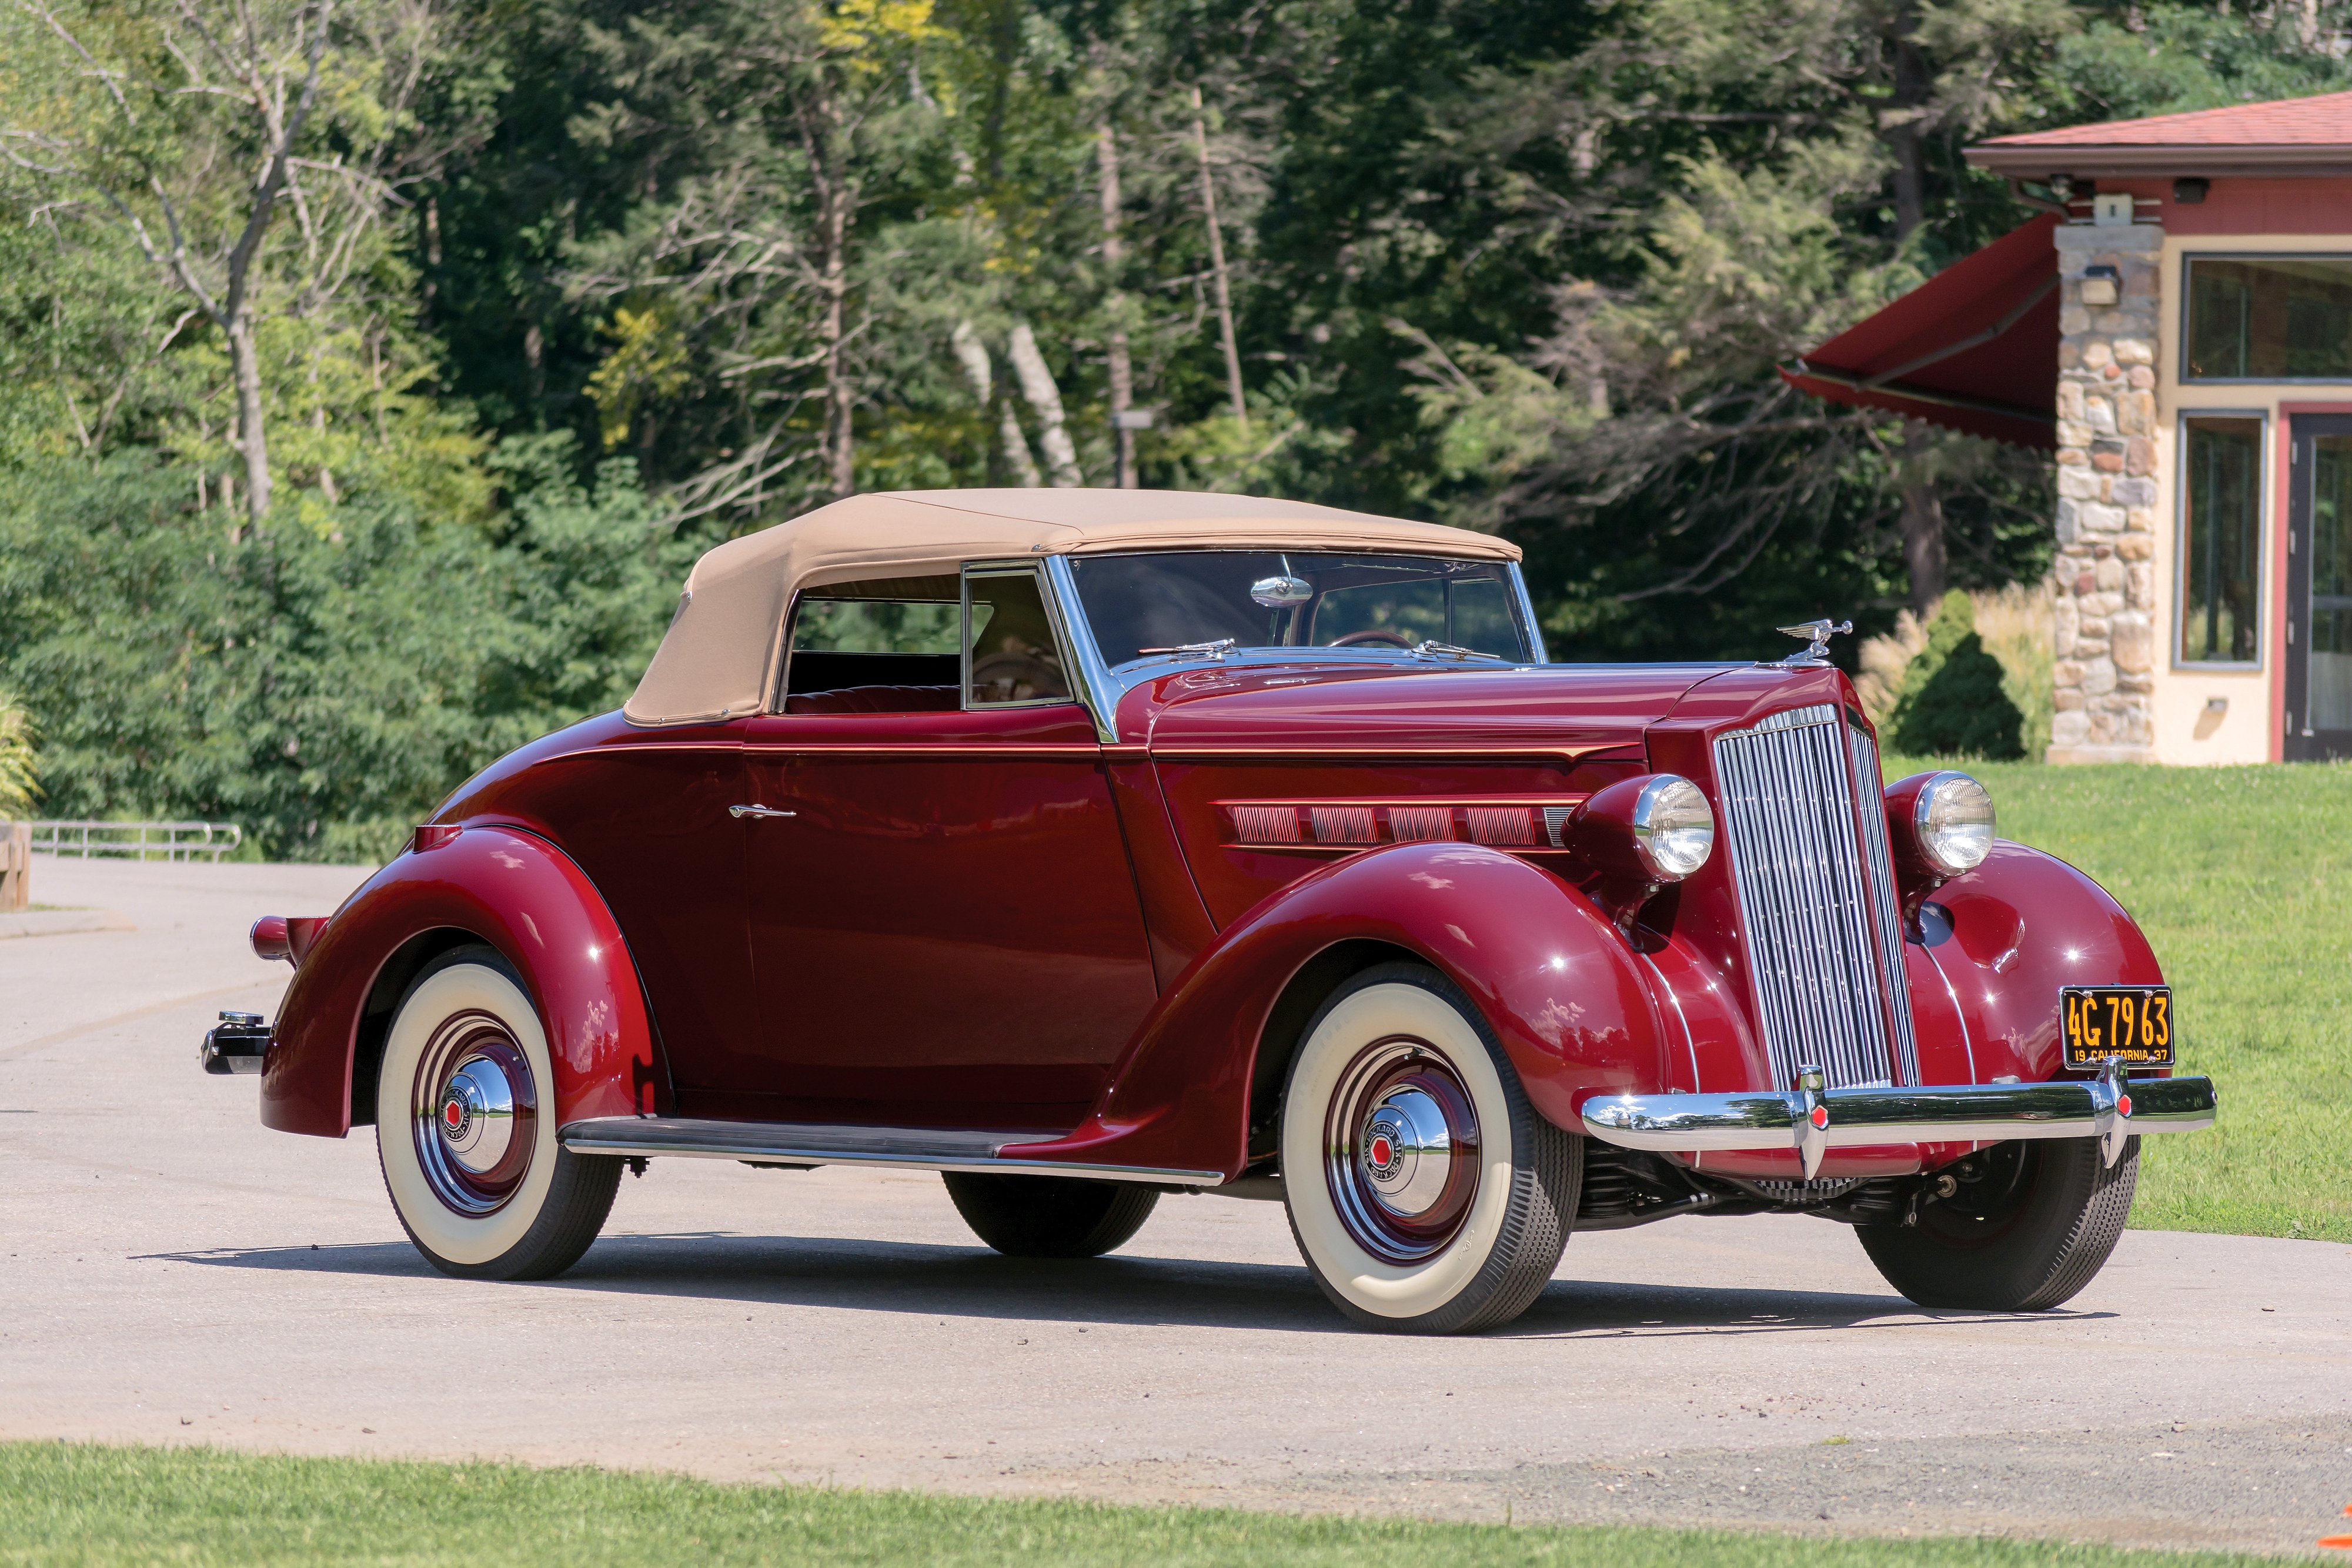 1937, Packard, Six, Convertible, Coupe, 115 c1089, Luxury, Vintage, Retro Wallpaper